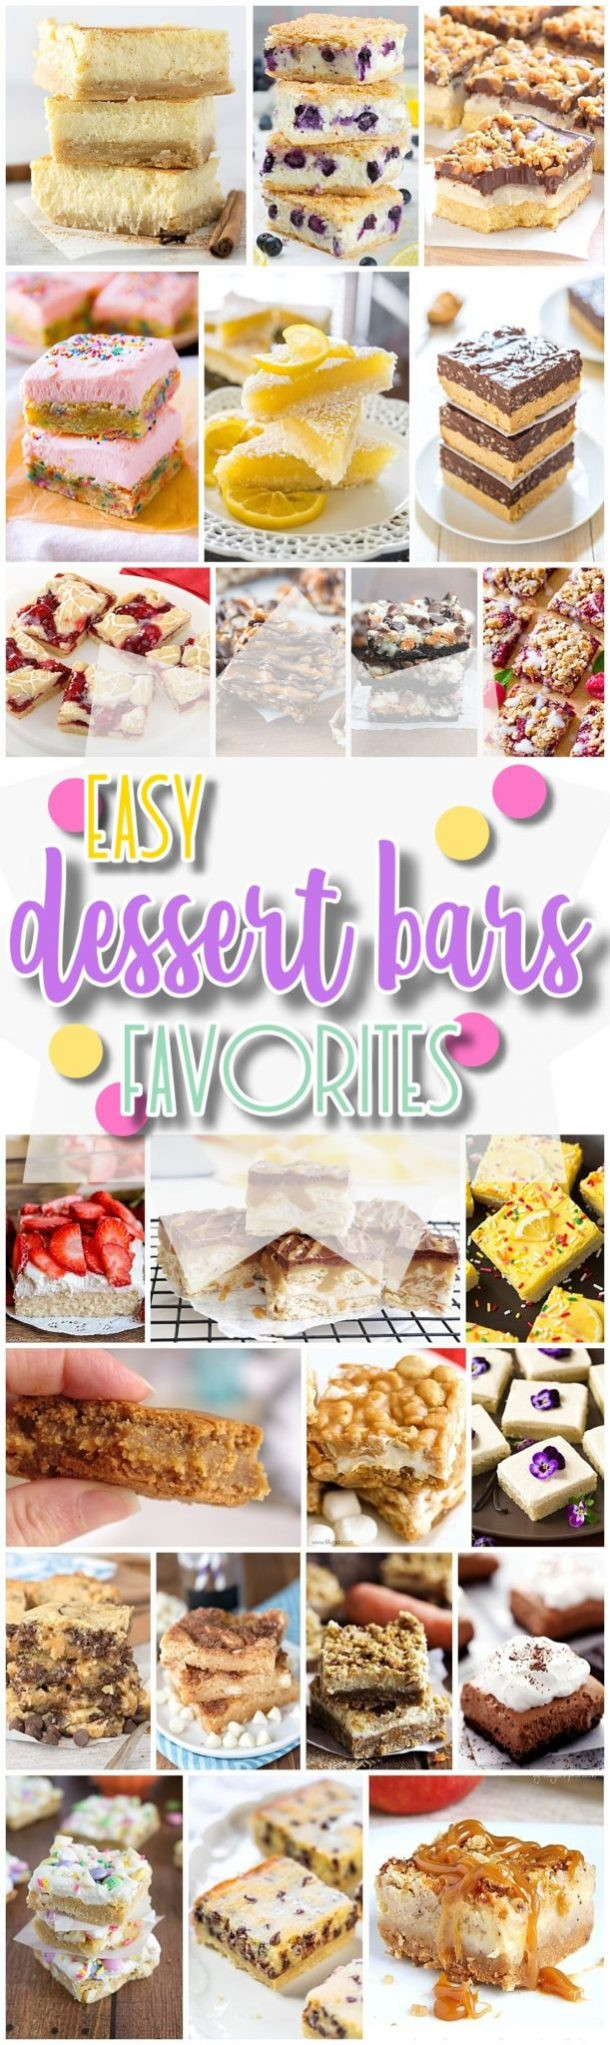 Party Desserts For A Crowd
 The Best Easy Desserts Bars Recipes – Favorite New Plus